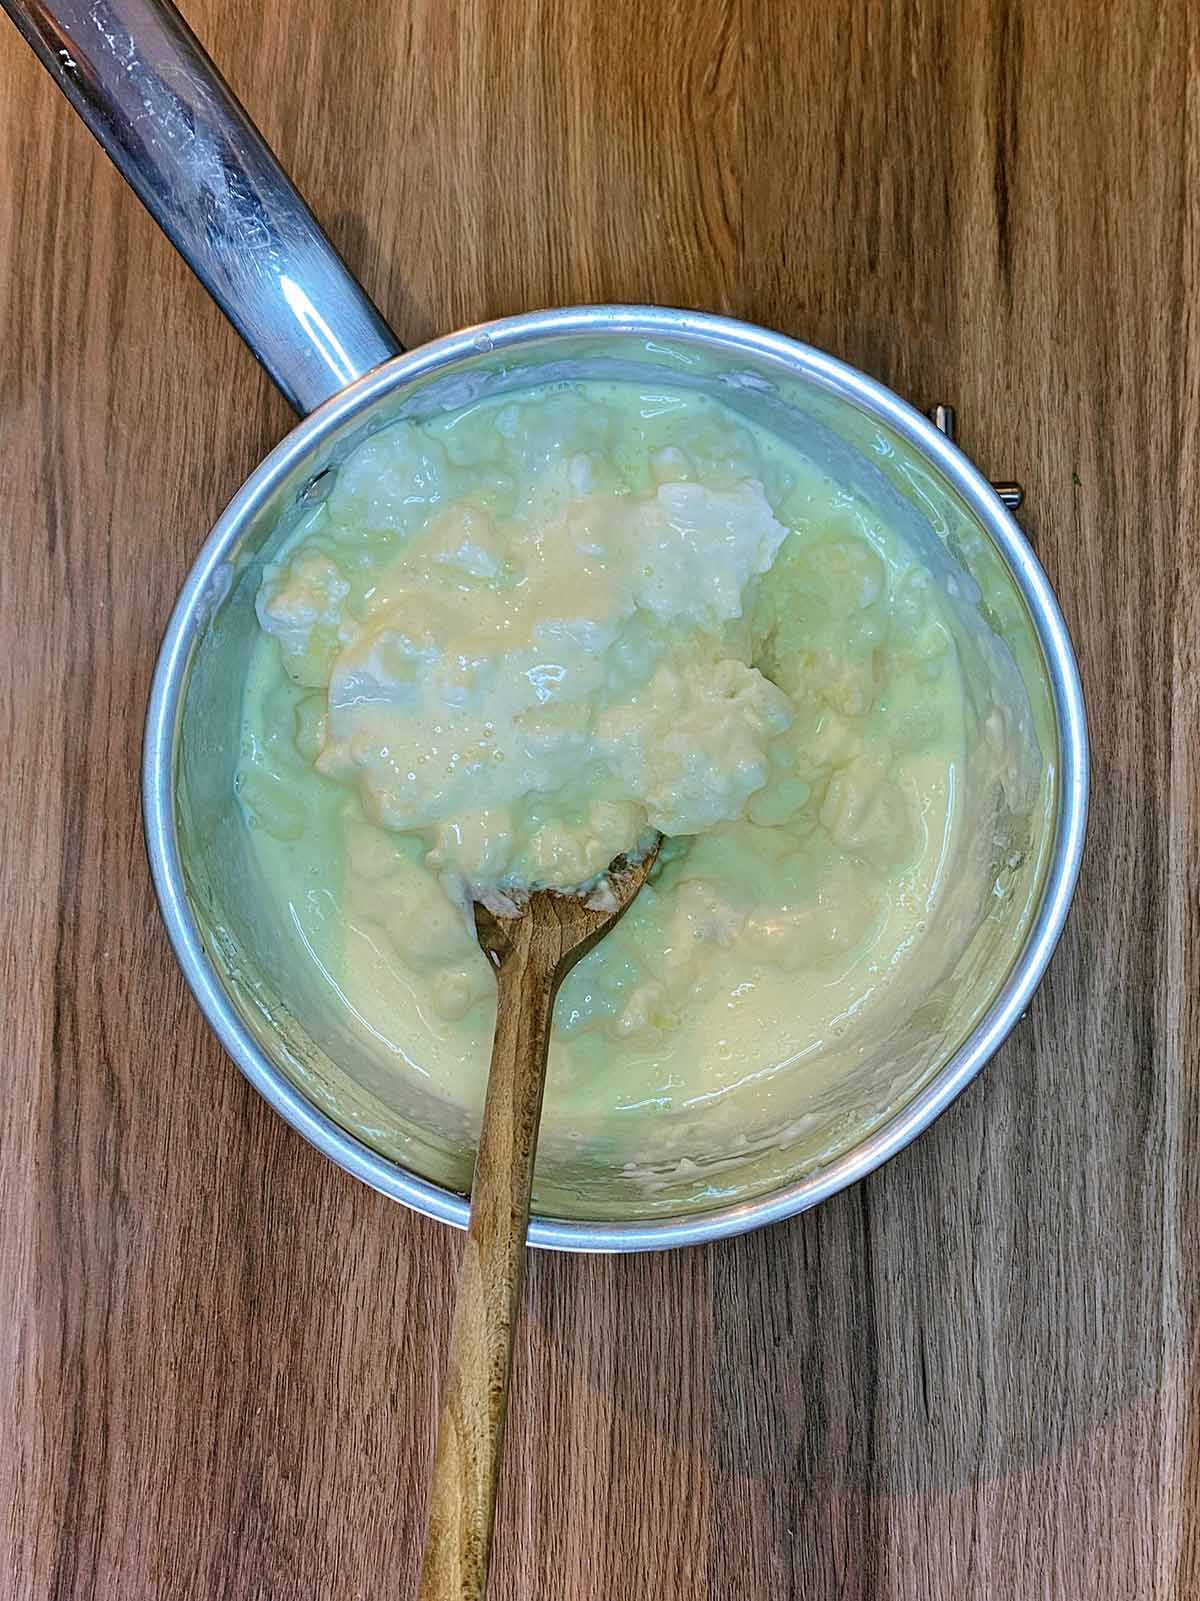 Mashed potatoes added to the cream and butter.